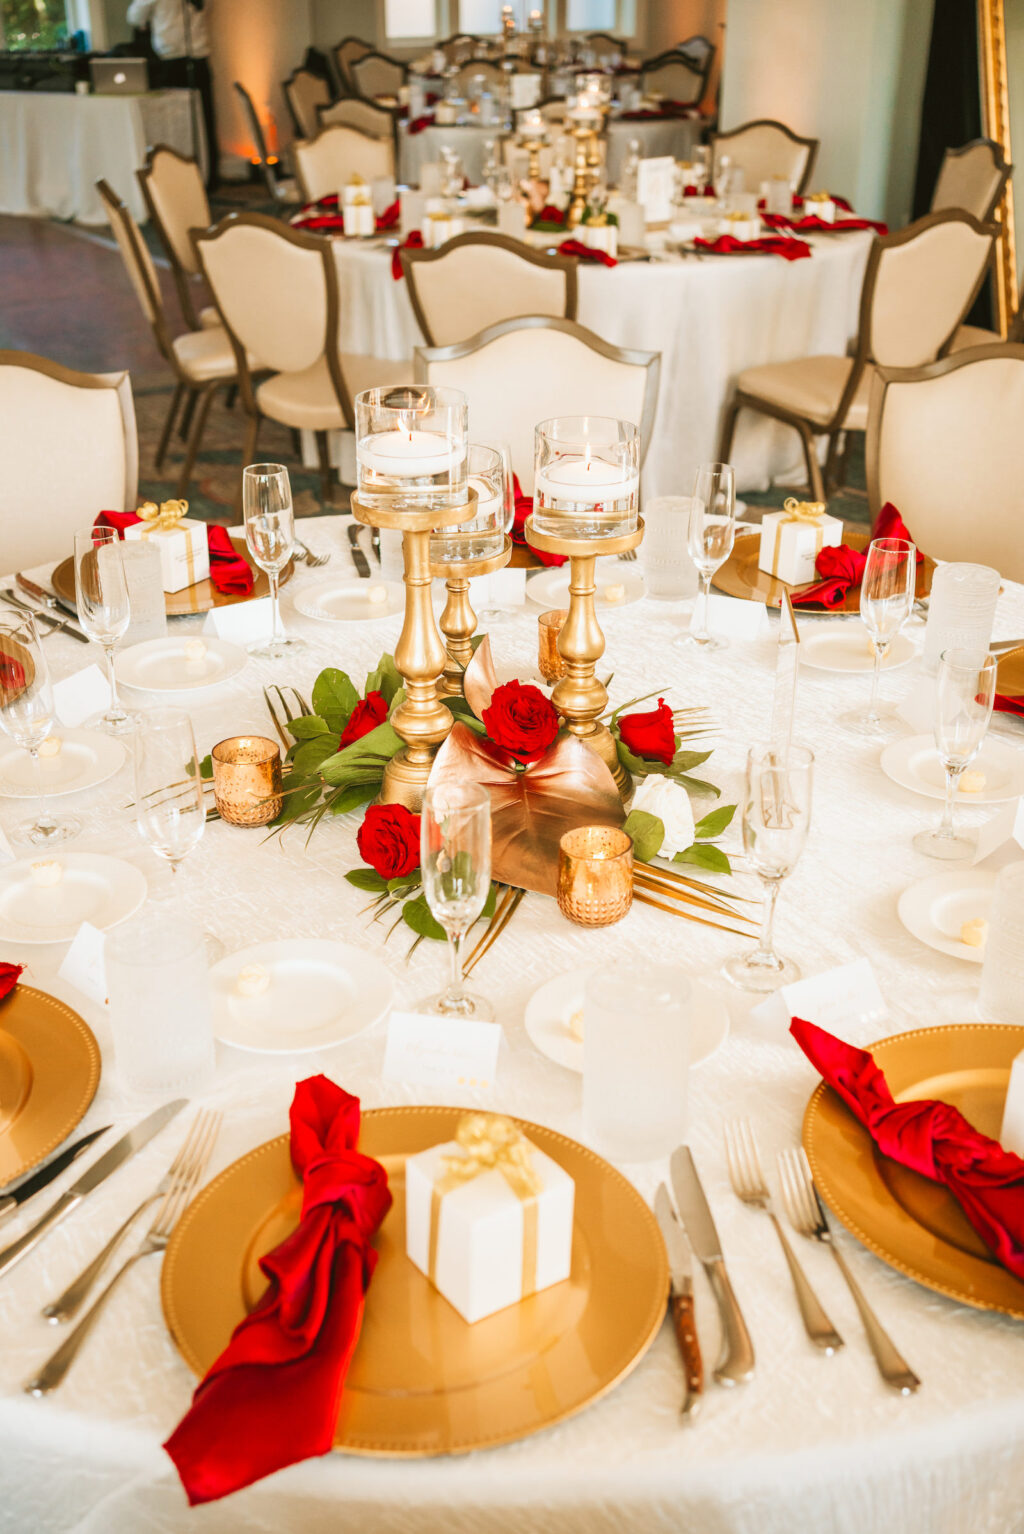 Fall classic wedding reception decor, gold chargers with red linen napkins, wedding favor box, gold candlestick floating candles centerpiece, red roses, palm fronds | Tampa Bay wedding photographer Bonnie Newman Creative | Wedding planner Coastal Coordinating | Wedding florist Iza’s Flowers